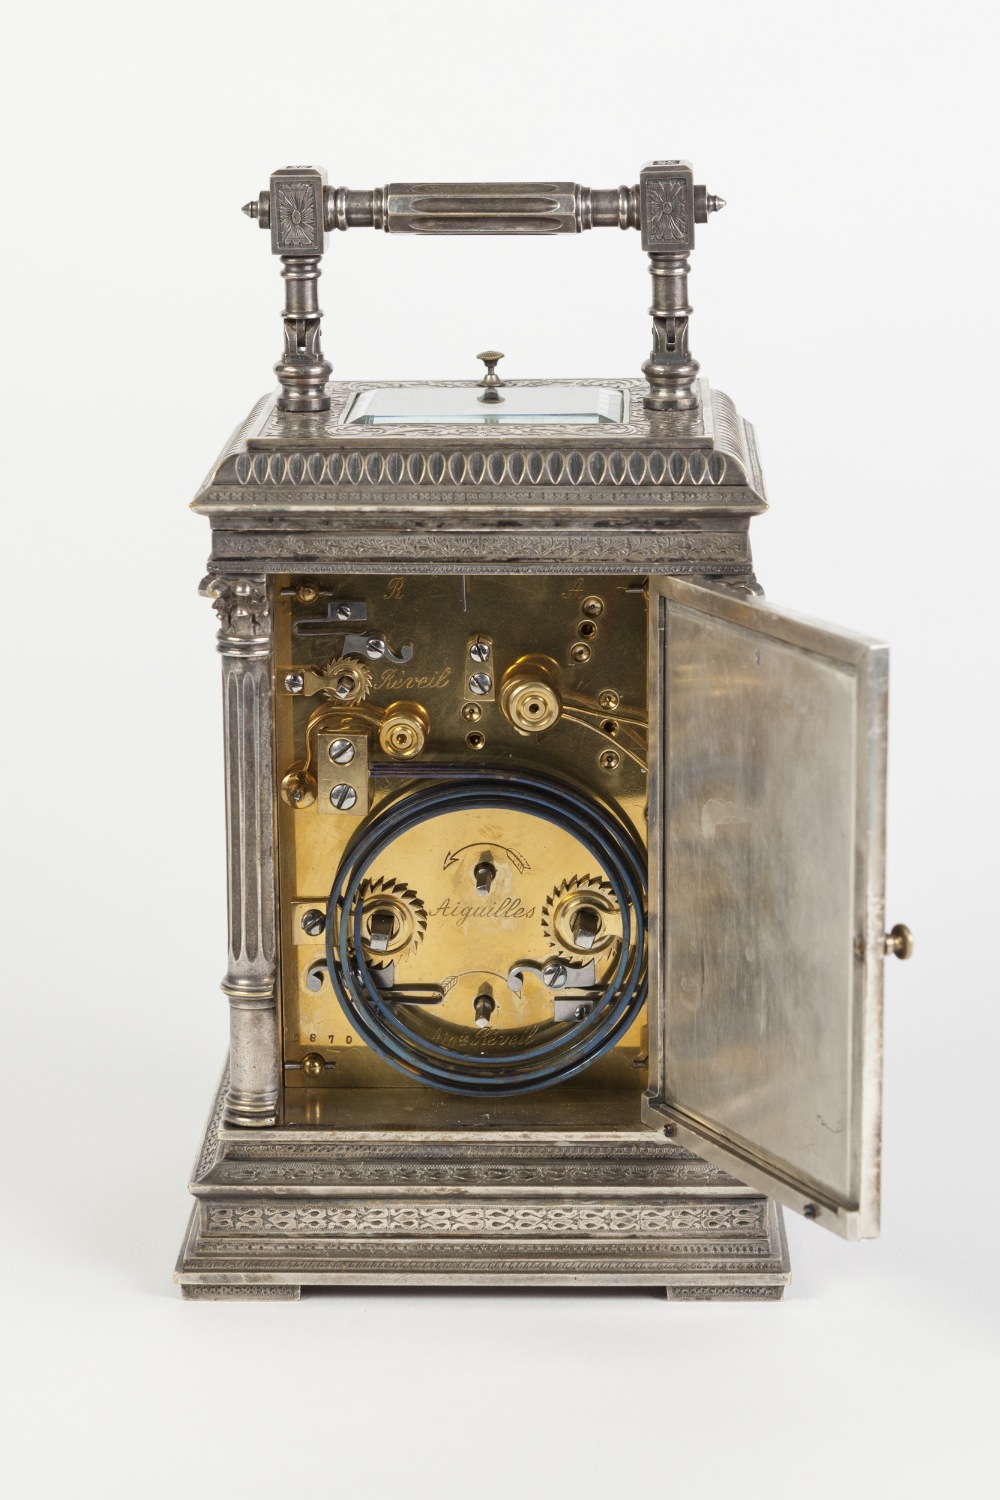 CHARLES H JOSEPH, PARIS (1852 - 1935) PETITE SONNERIE CARRIAGE CLOCK striking on two gongs, with - Image 2 of 5